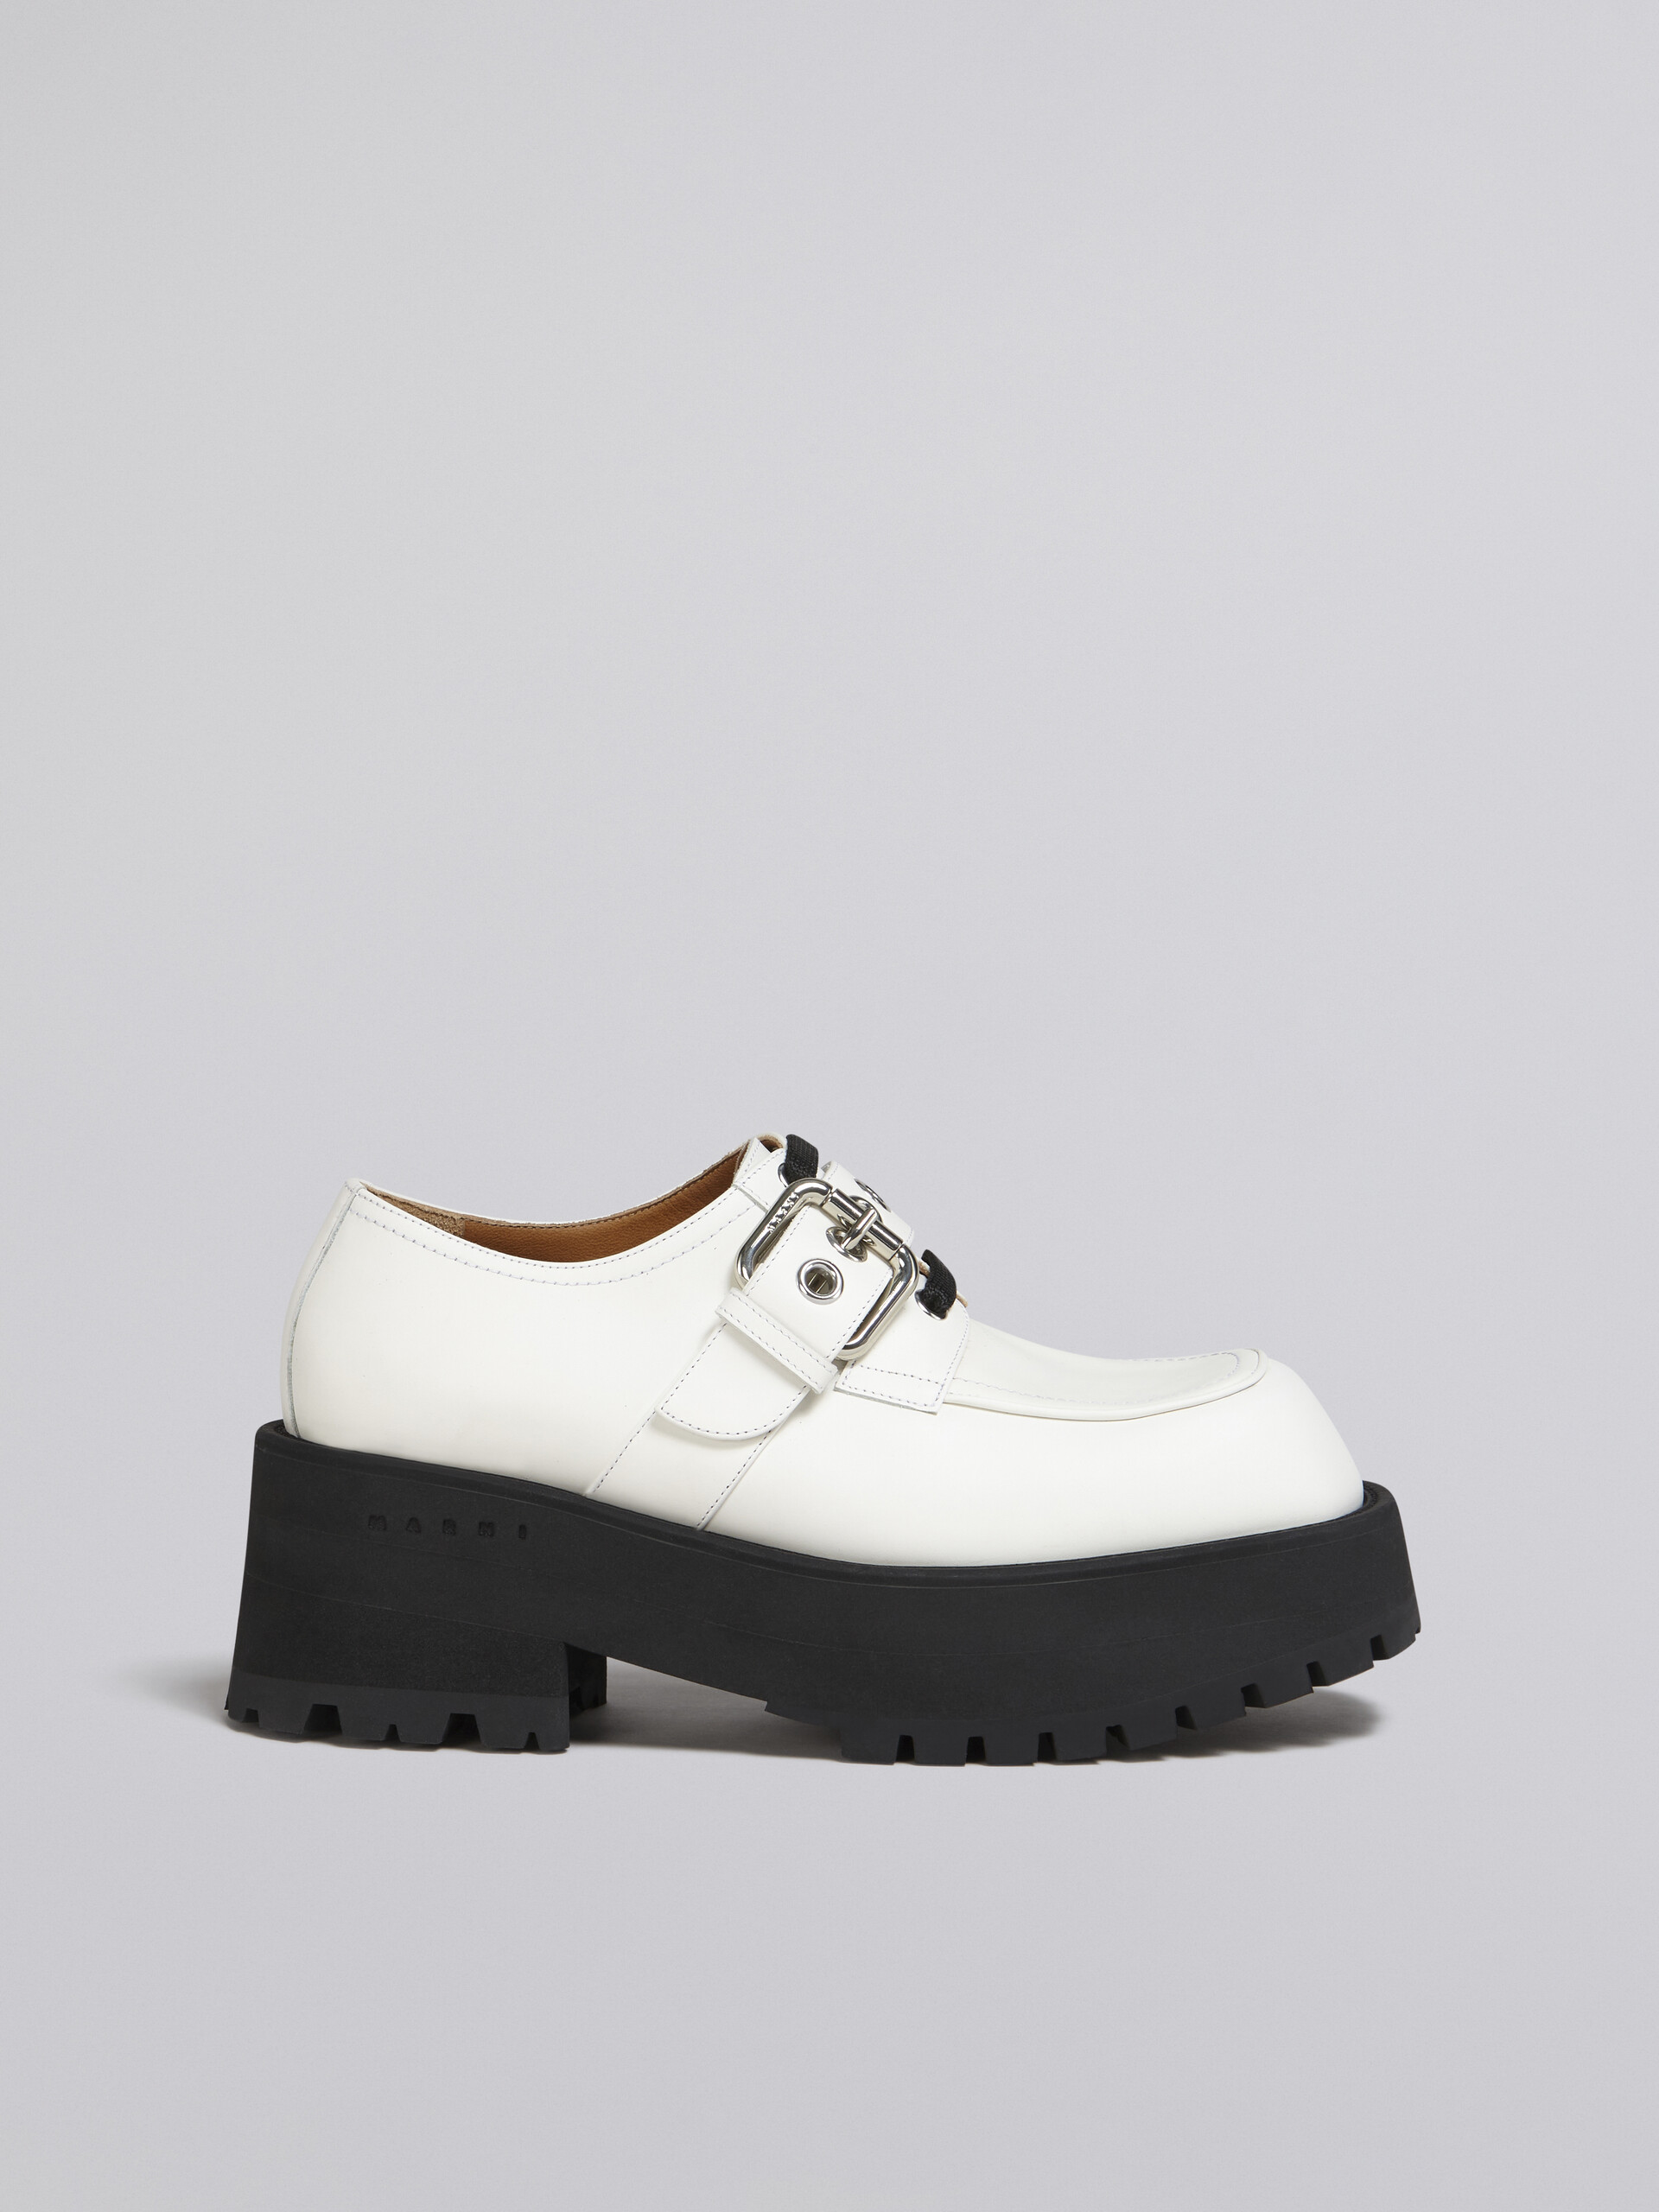 White soft calf leather moccasin - Lace-ups - Image 1